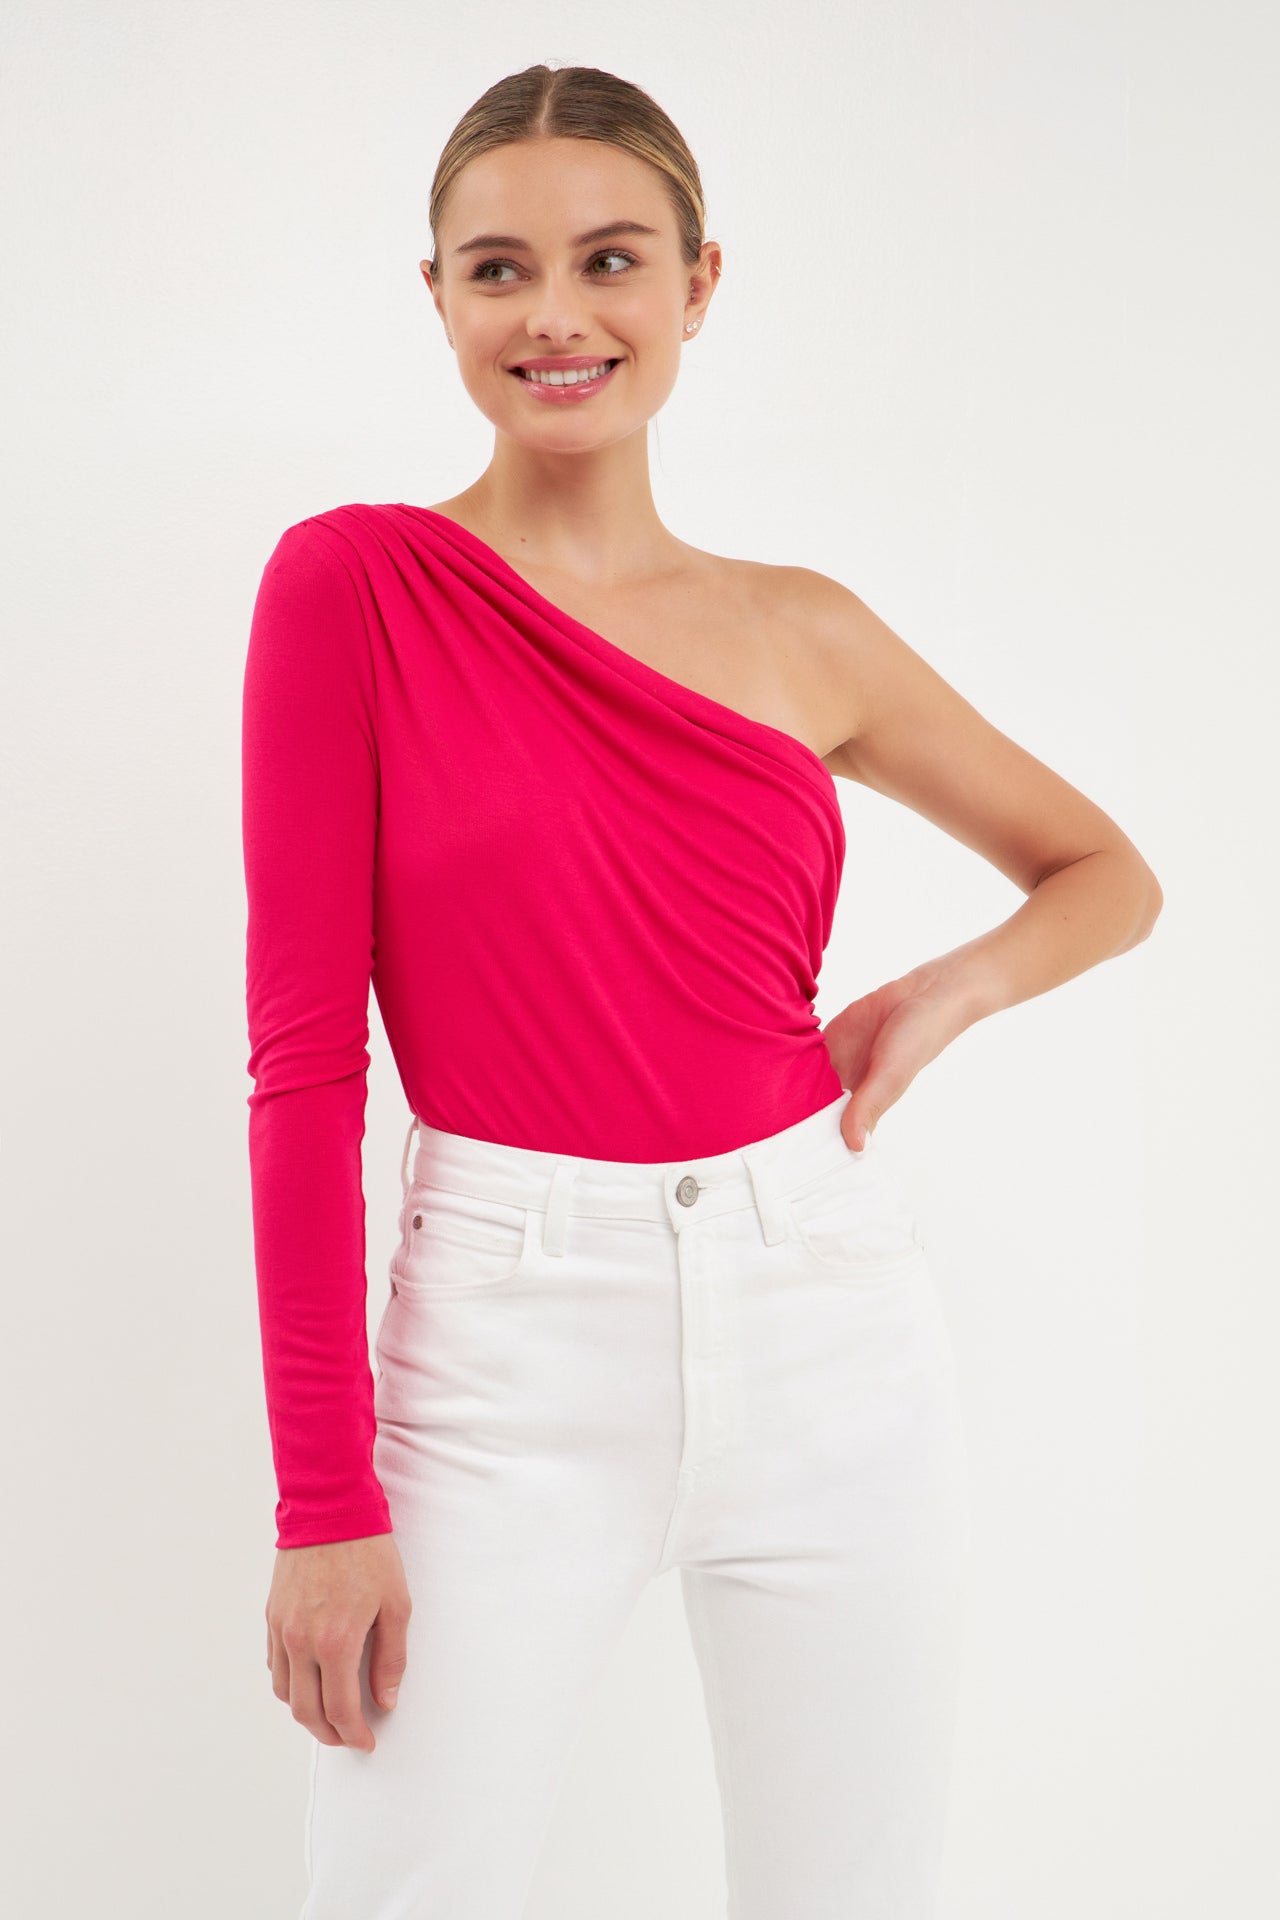 ENDLESS ROSE - One Shoulder Bodysuit - TOPS available at Objectrare